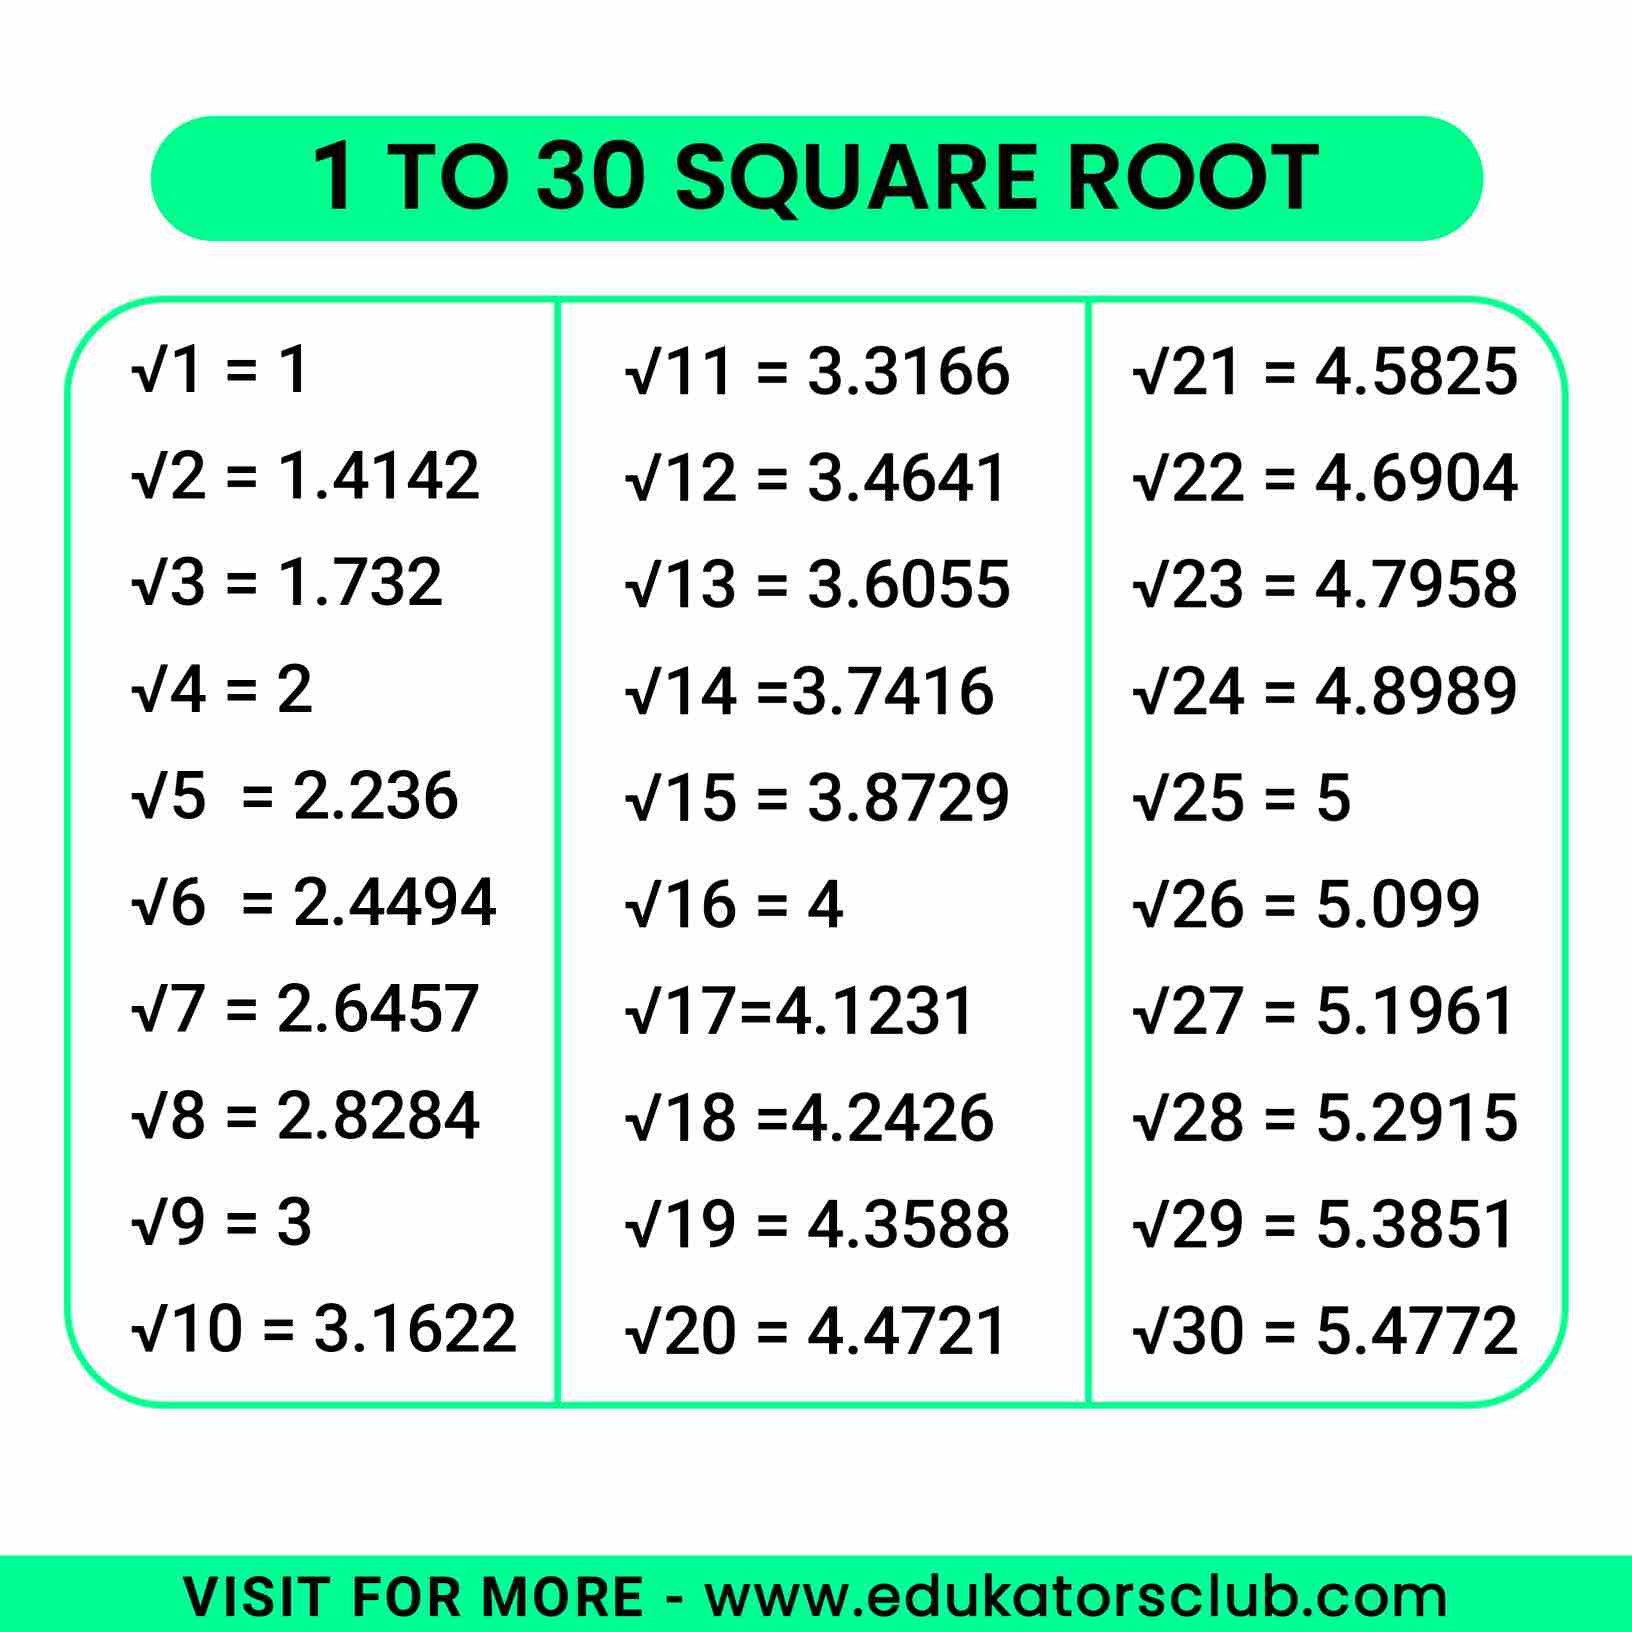 Squared root me. Square root. A Square root бирка. A Square root одежда. Square root of 1.02.